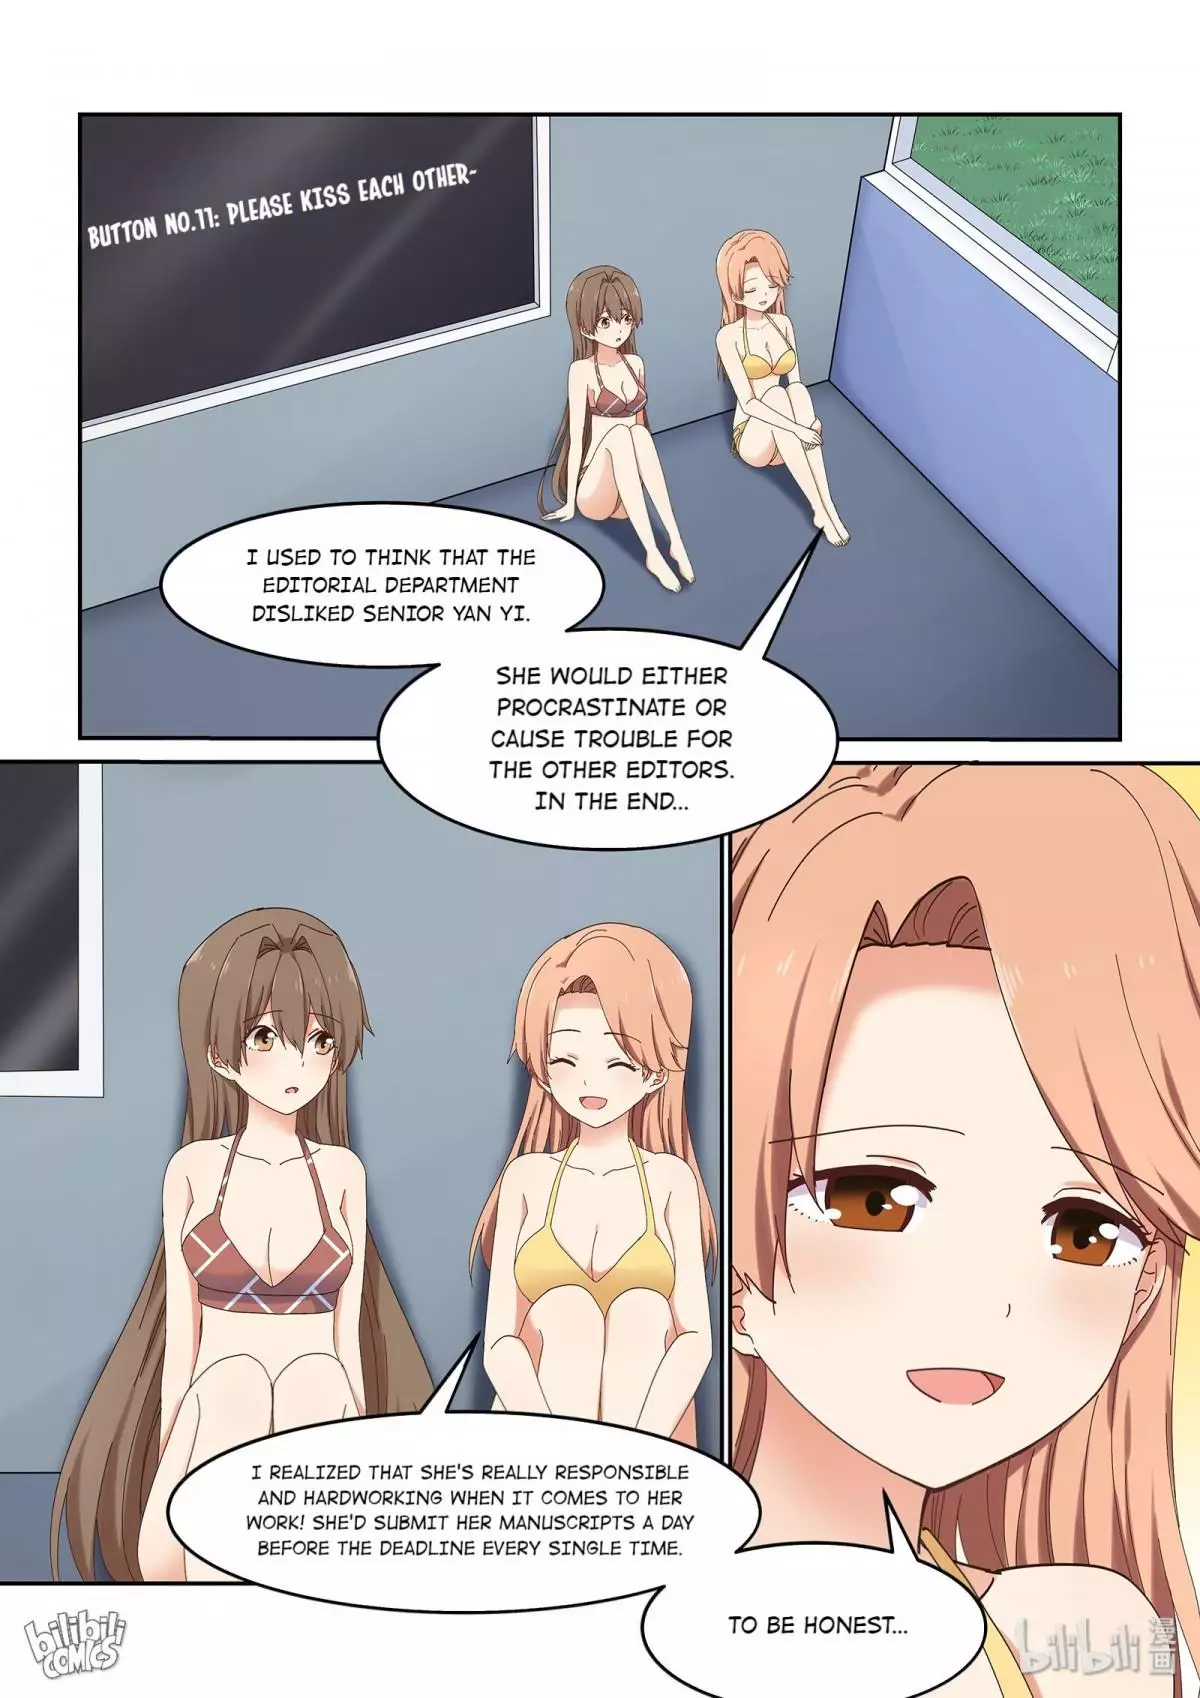 I Decided To Offer Myself To Motivate Senpai - 59 page 5-2c34001c